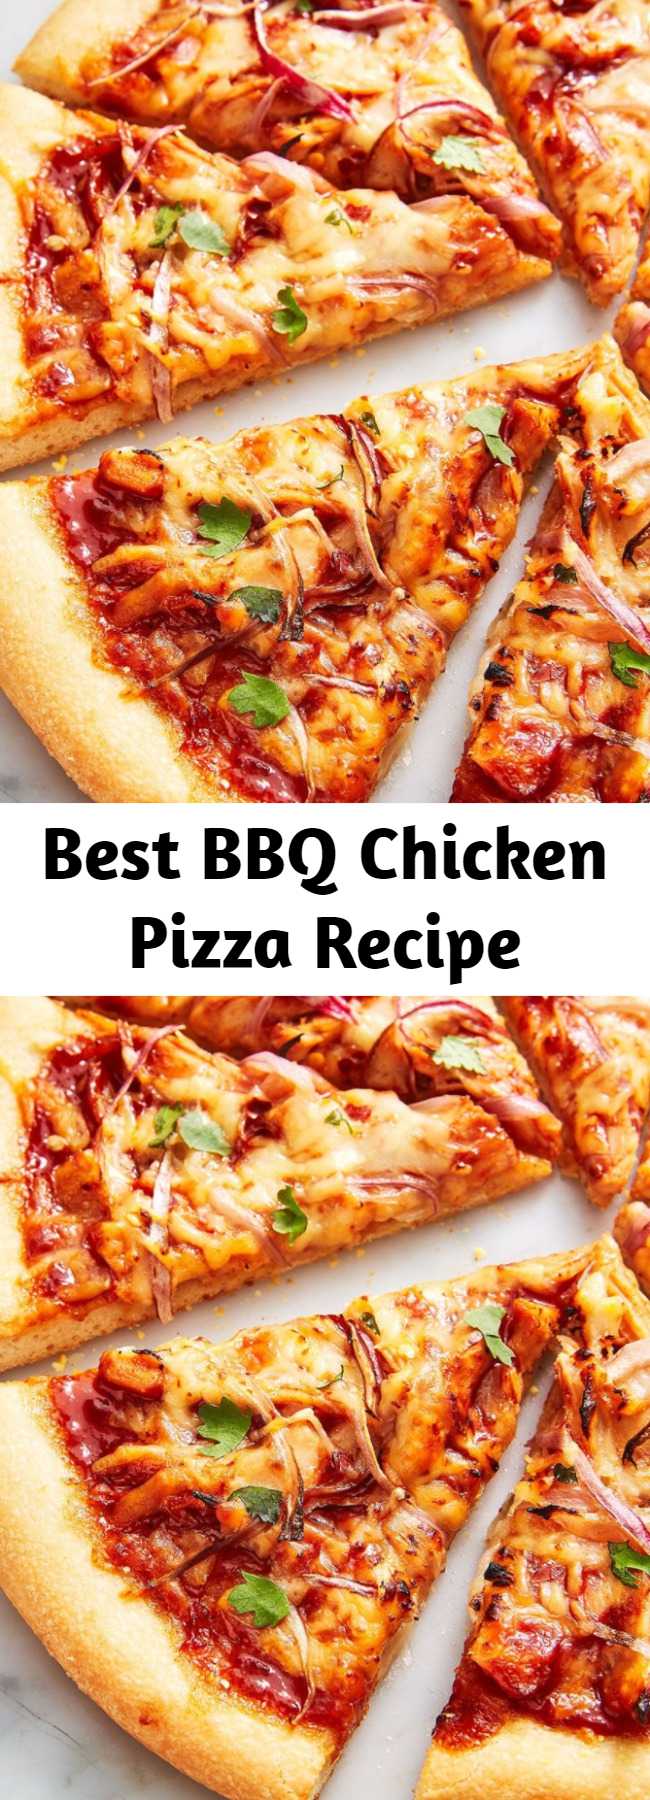 Best BBQ Chicken Pizza Recipe -  Our recipe uses tangy gouda, creamy mozzarella, and a hefty dose of red onions and cilantro for freshness. We happen to think it gives good ol' CPK a run for their money.